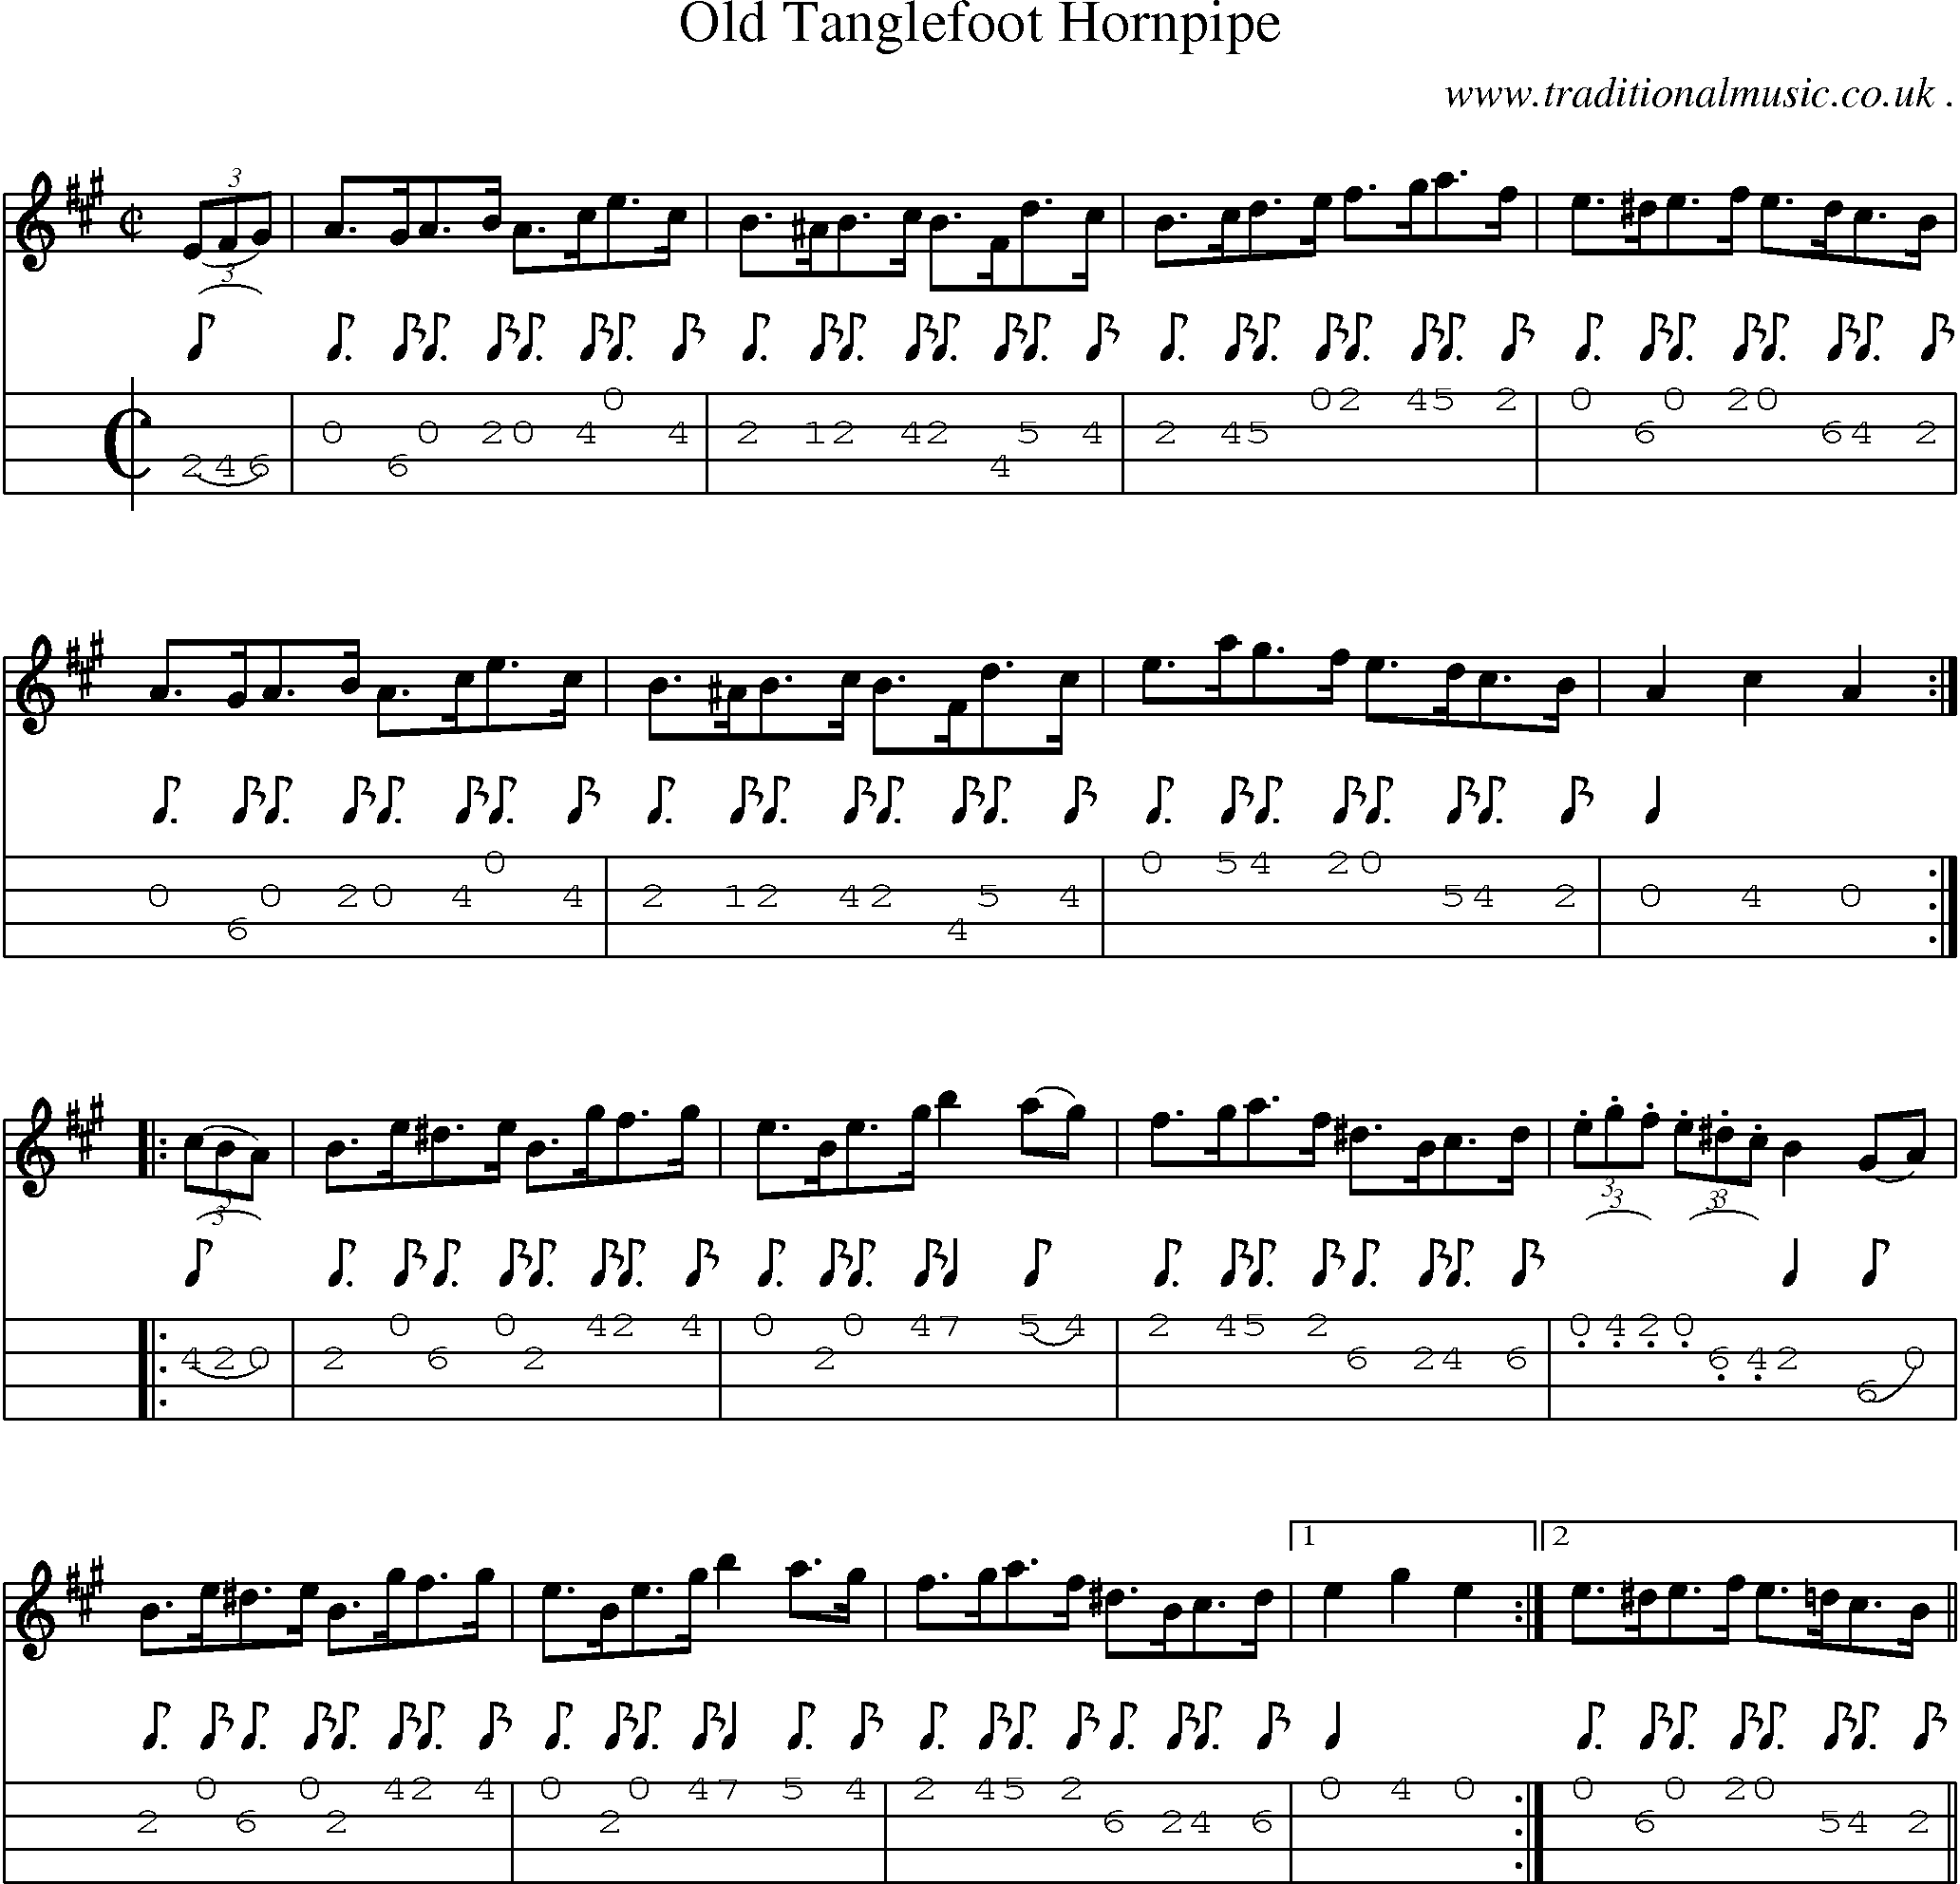 Sheet-Music and Mandolin Tabs for Old Tanglefoot Hornpipe